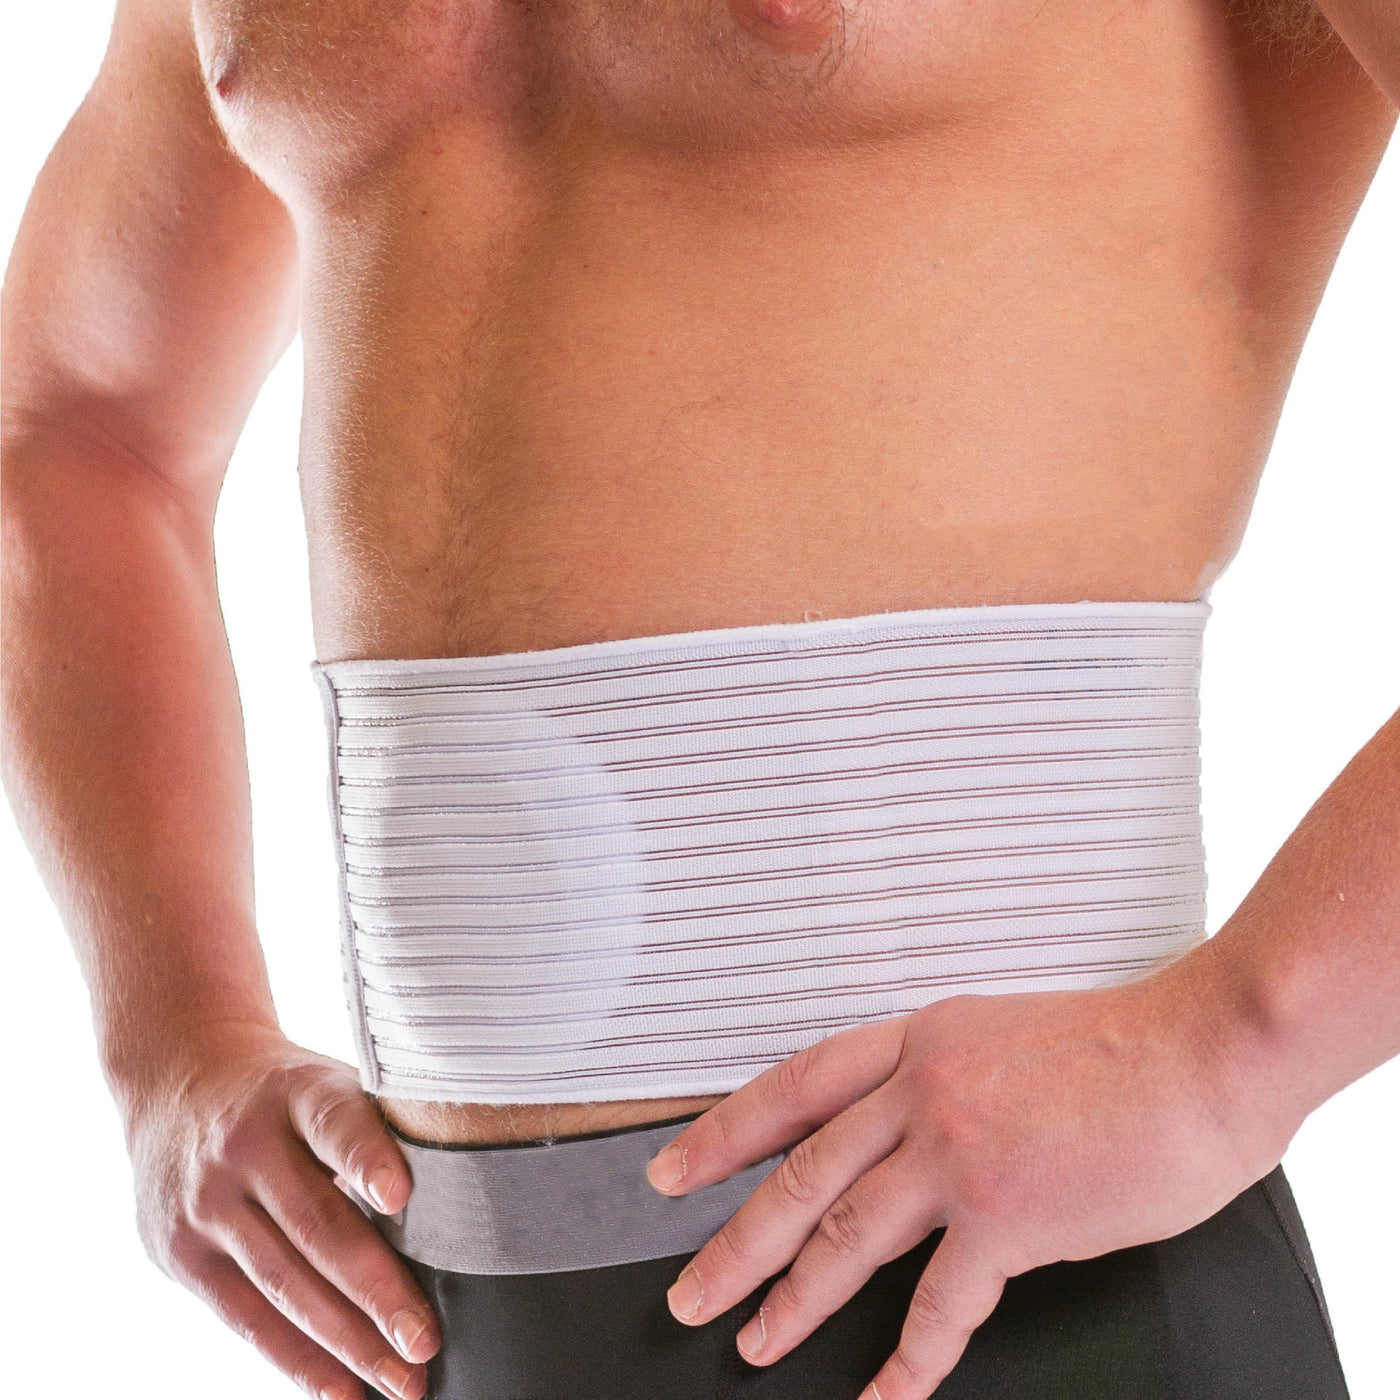 Generic Umbilical Hernia Belt For Men And Women - Abdominal Support